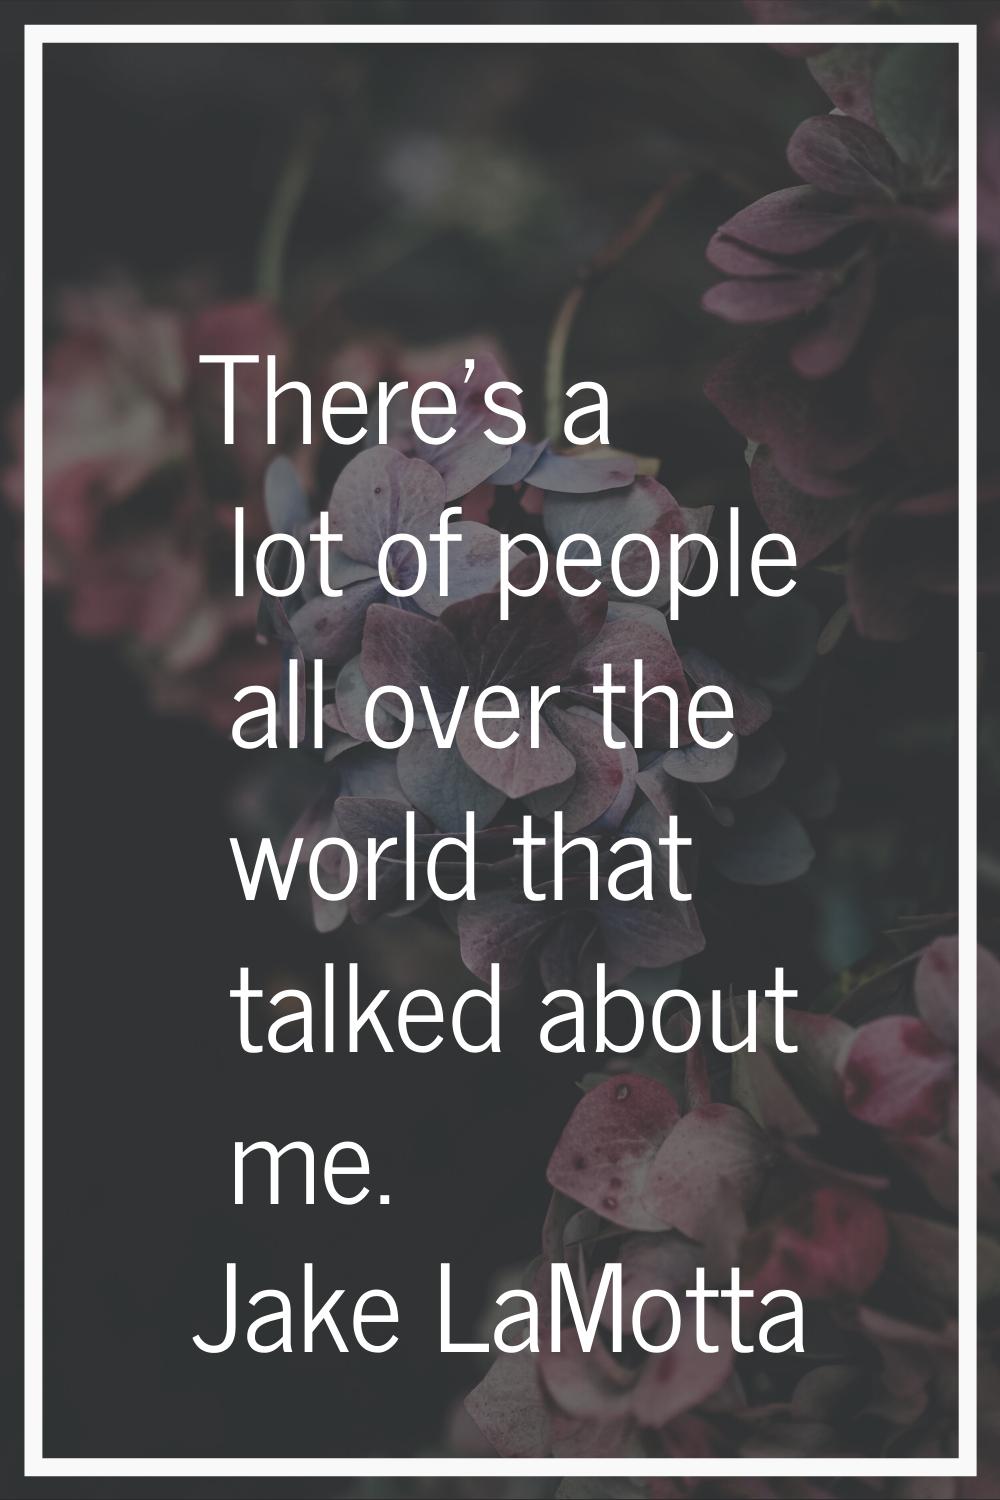 There's a lot of people all over the world that talked about me.